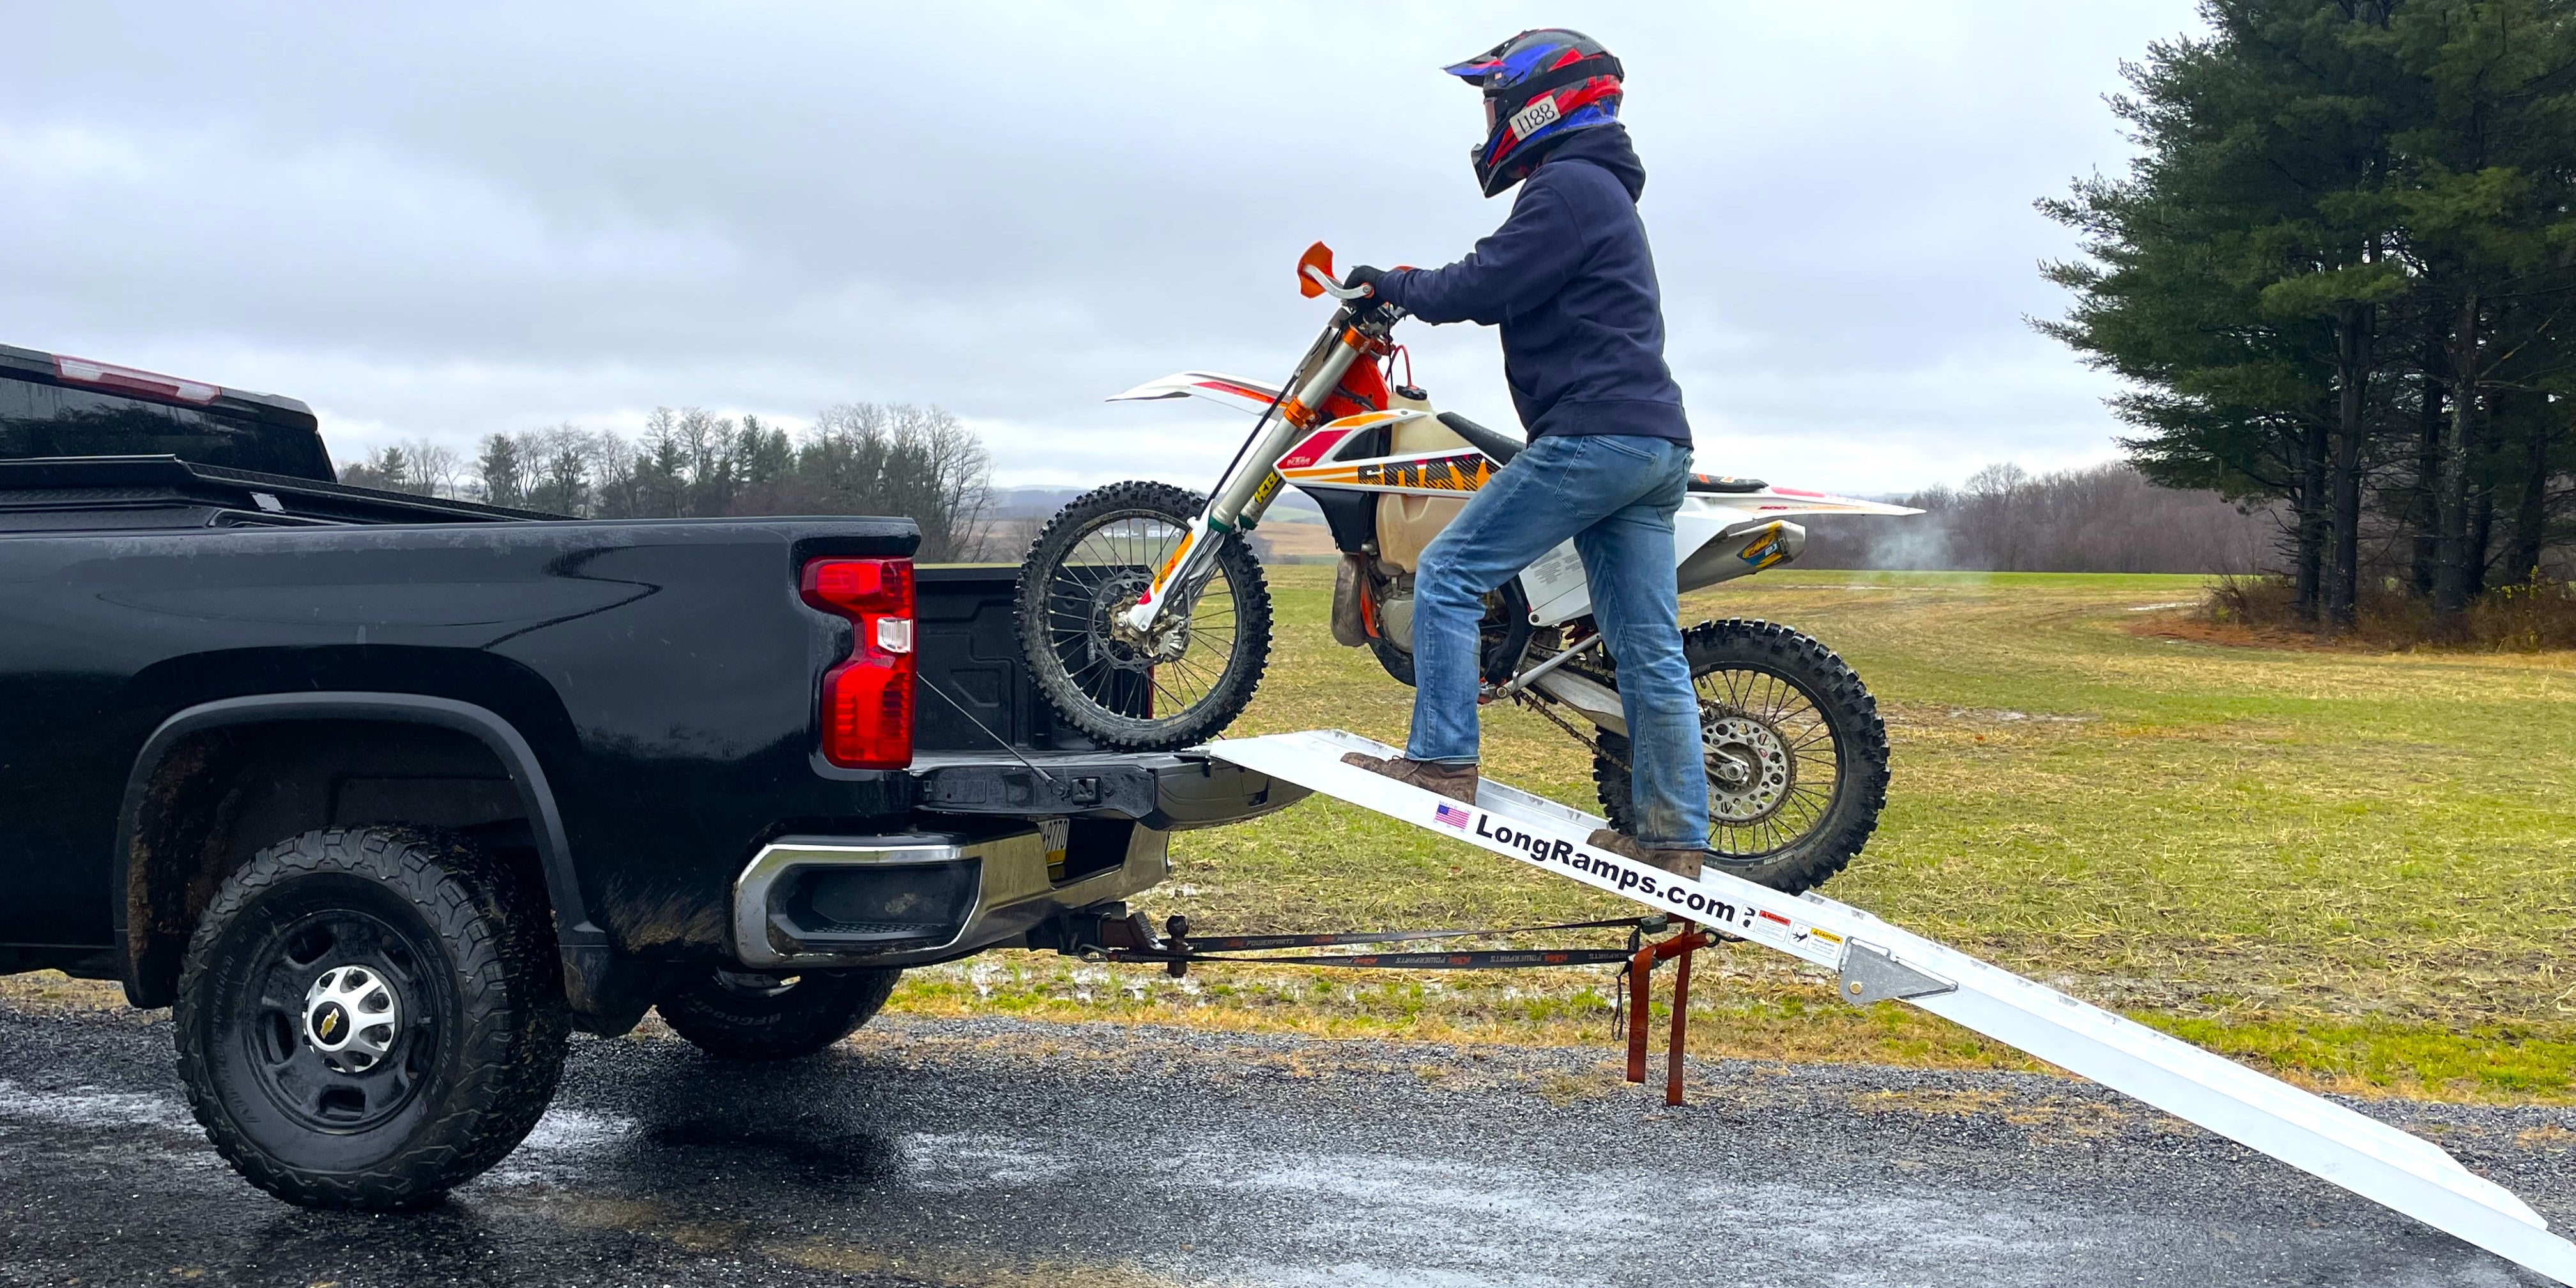 towing-accessories-for-dirt-bikes